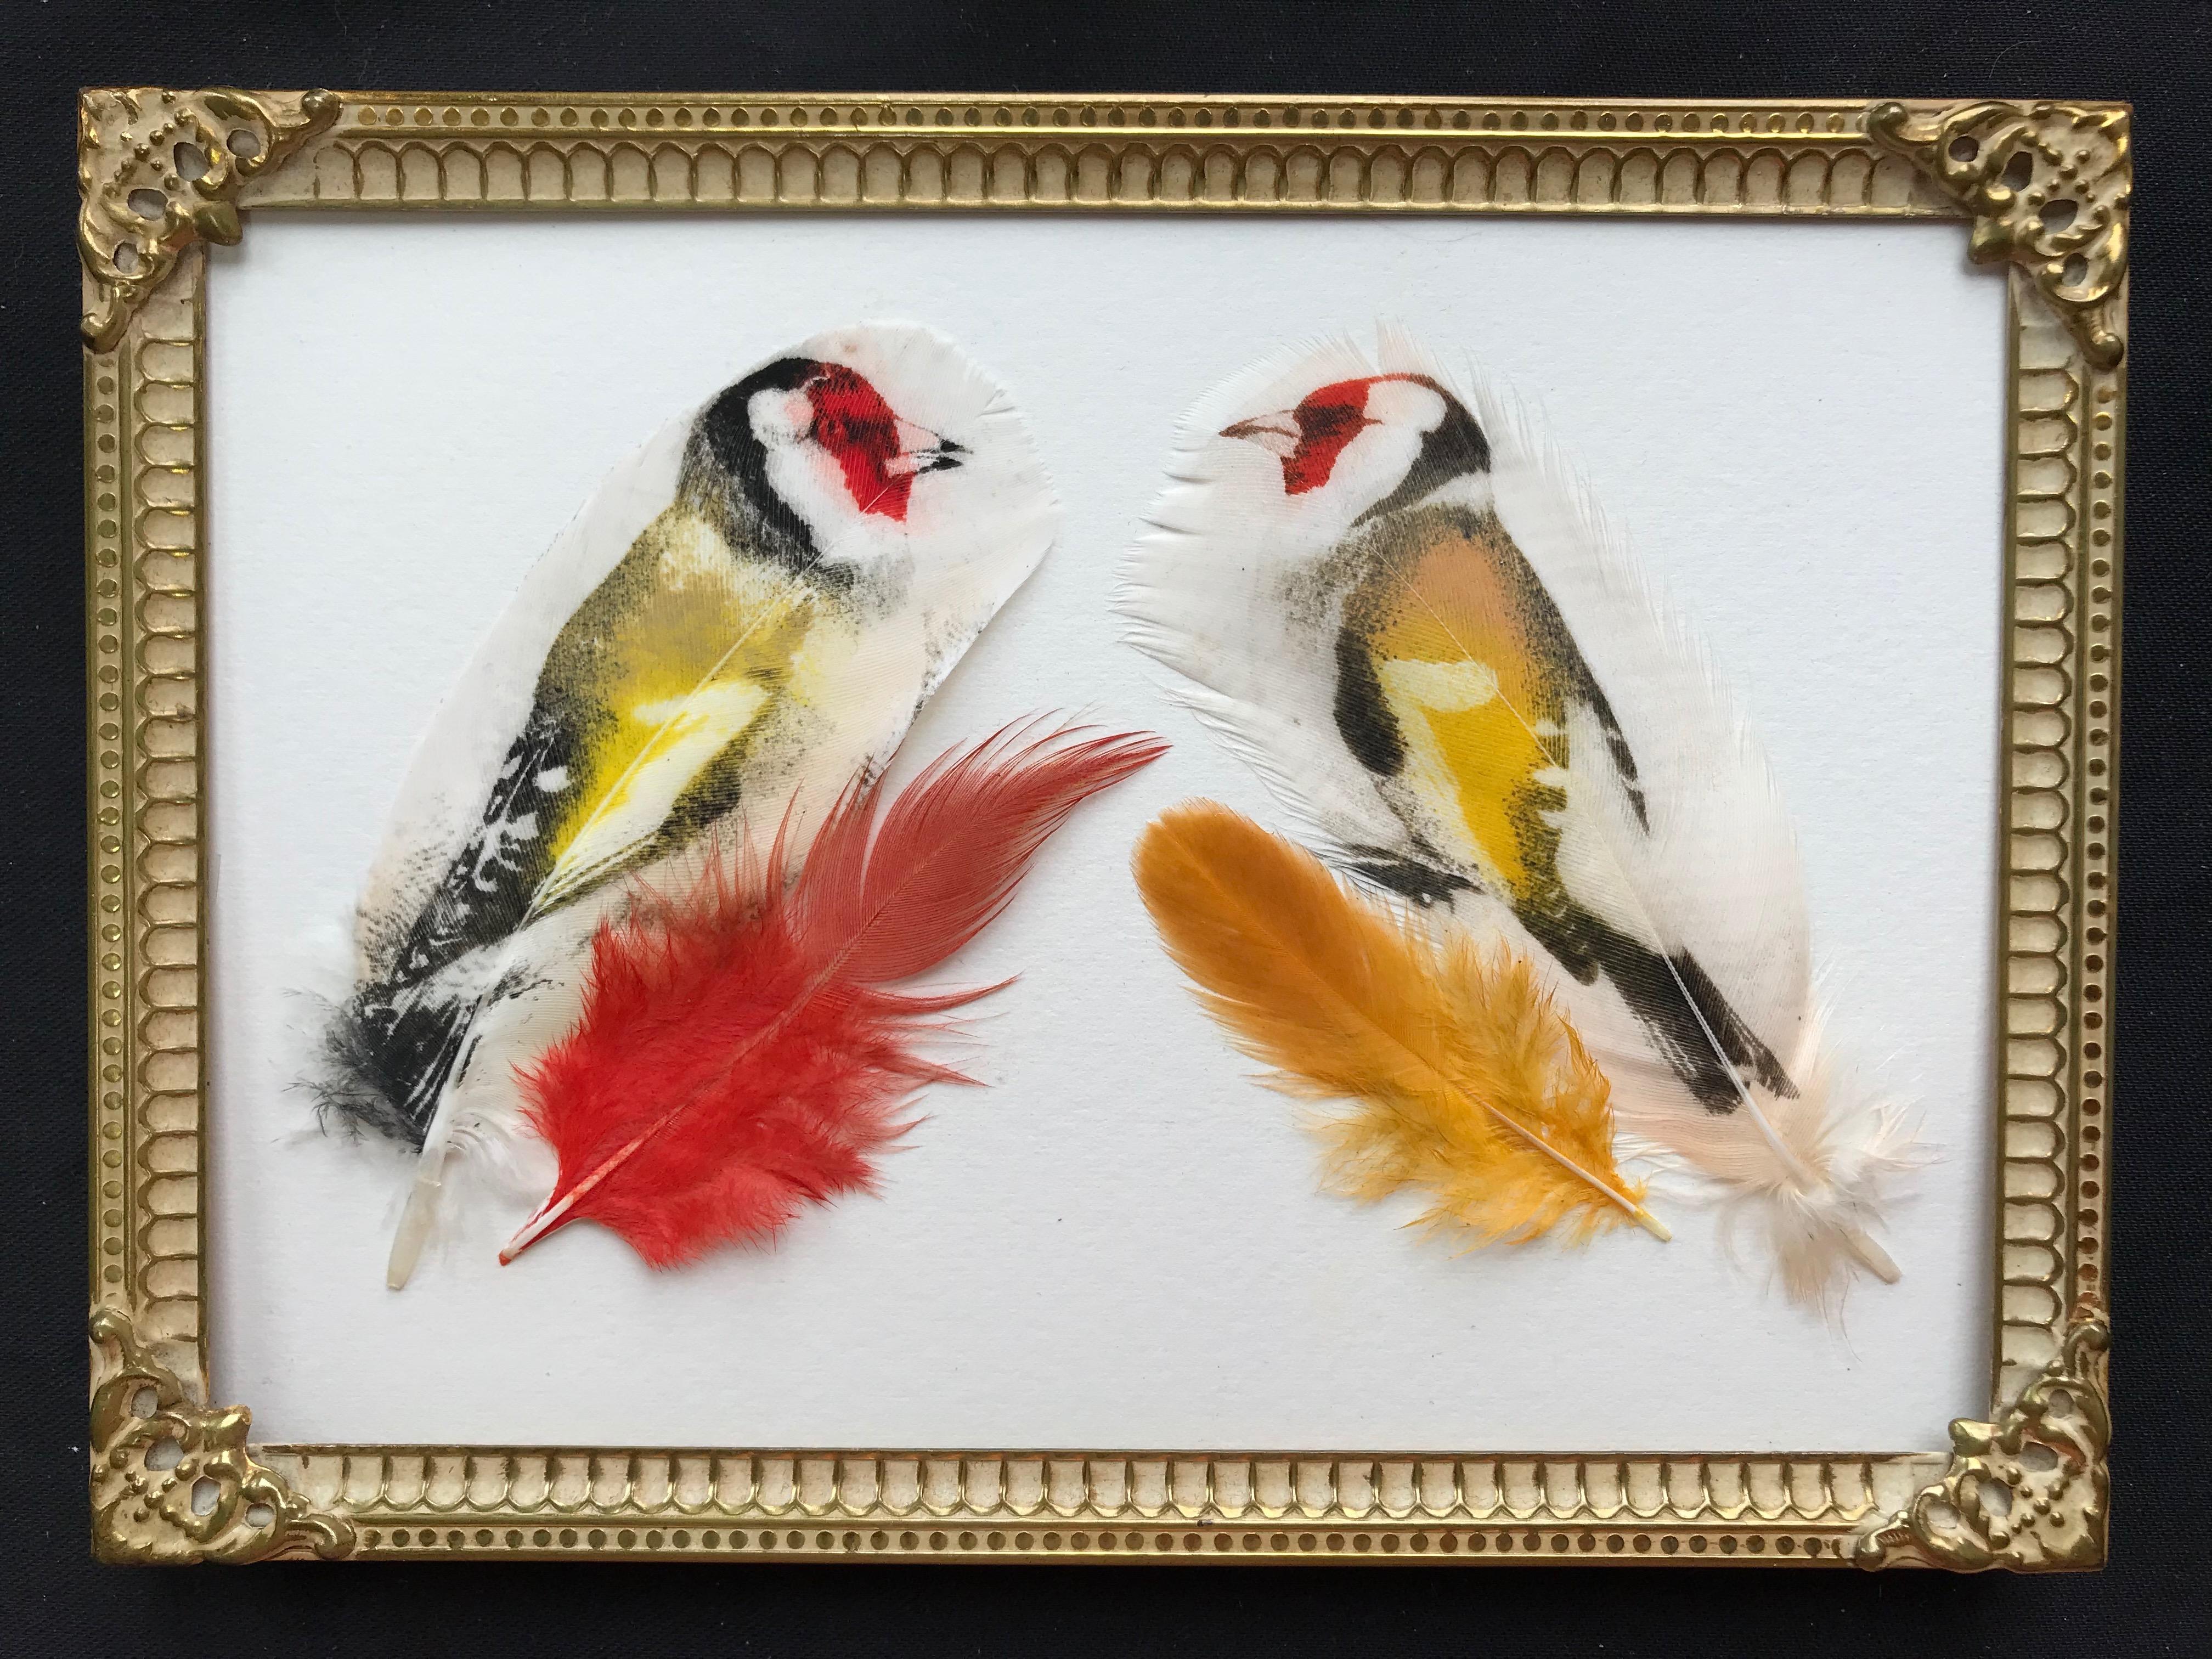 Two Goldfinches - Goldfinch, Feathers, Dome Frame, Birds, Nature, Vintage, Brass - Mixed Media Art by Rebecca Jewell